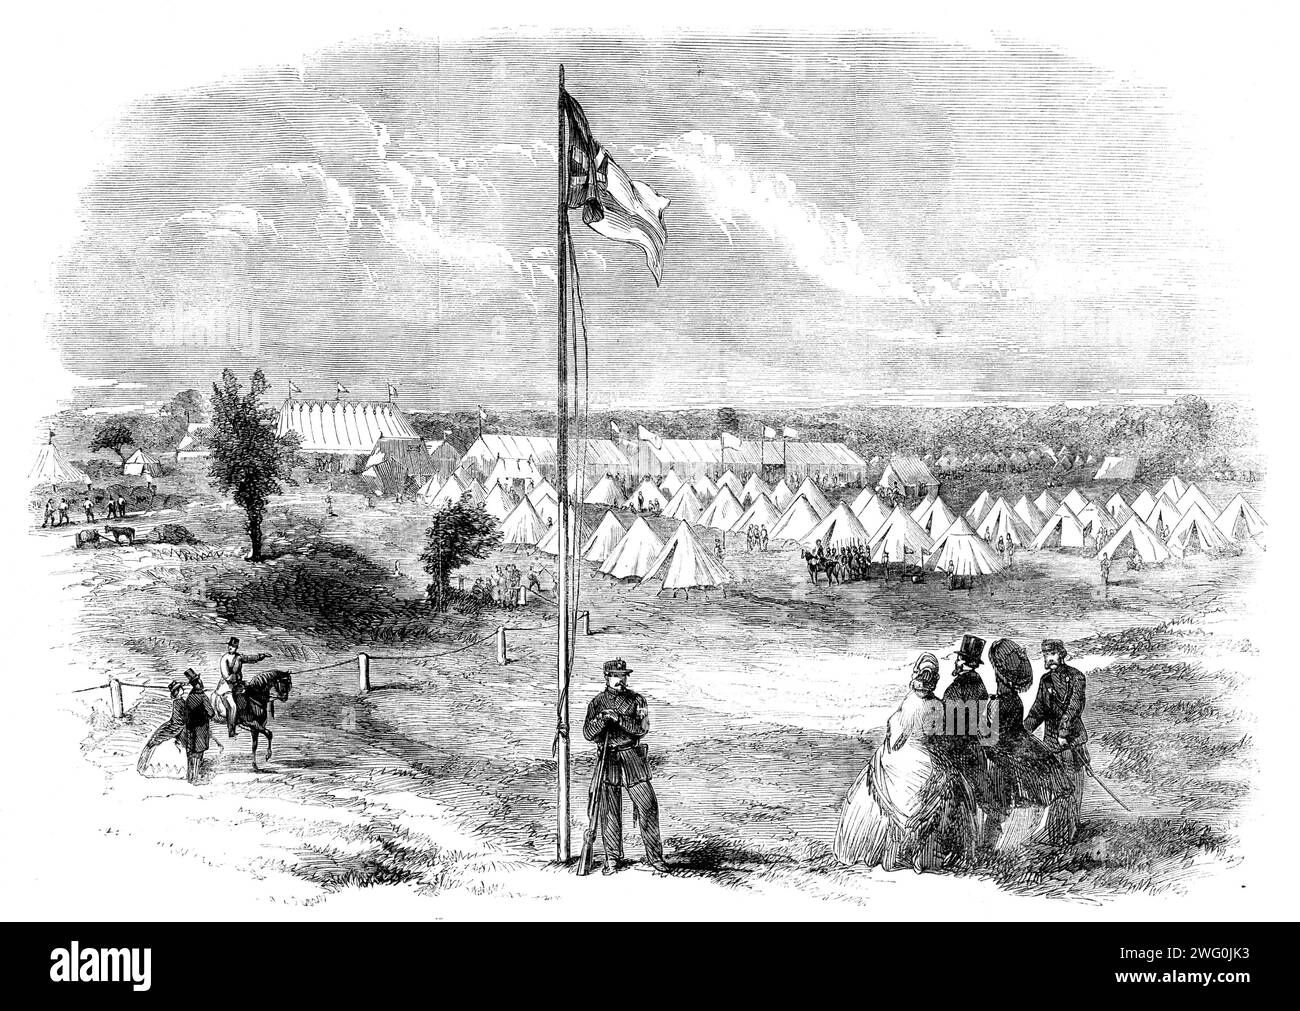 General view of the volunteer camp on Ascot Heath, [Berkshire], 1862. The '...second annual encampment and prize meeting of the Berkshire and Surrey volunteers...The camp was situated in a sheltered position in front of the Grand Stand, about half a mile from the Ascot station; and the tents were pitched, in parallel lines, on ground marked out according to military principles. The regulations were admirably carried out, and the volunteers adapted themselves to the novelty of camp life with the ease and coolness of old campaigners...there was a succession of rifle-shooting at various ranges fo Stock Photo